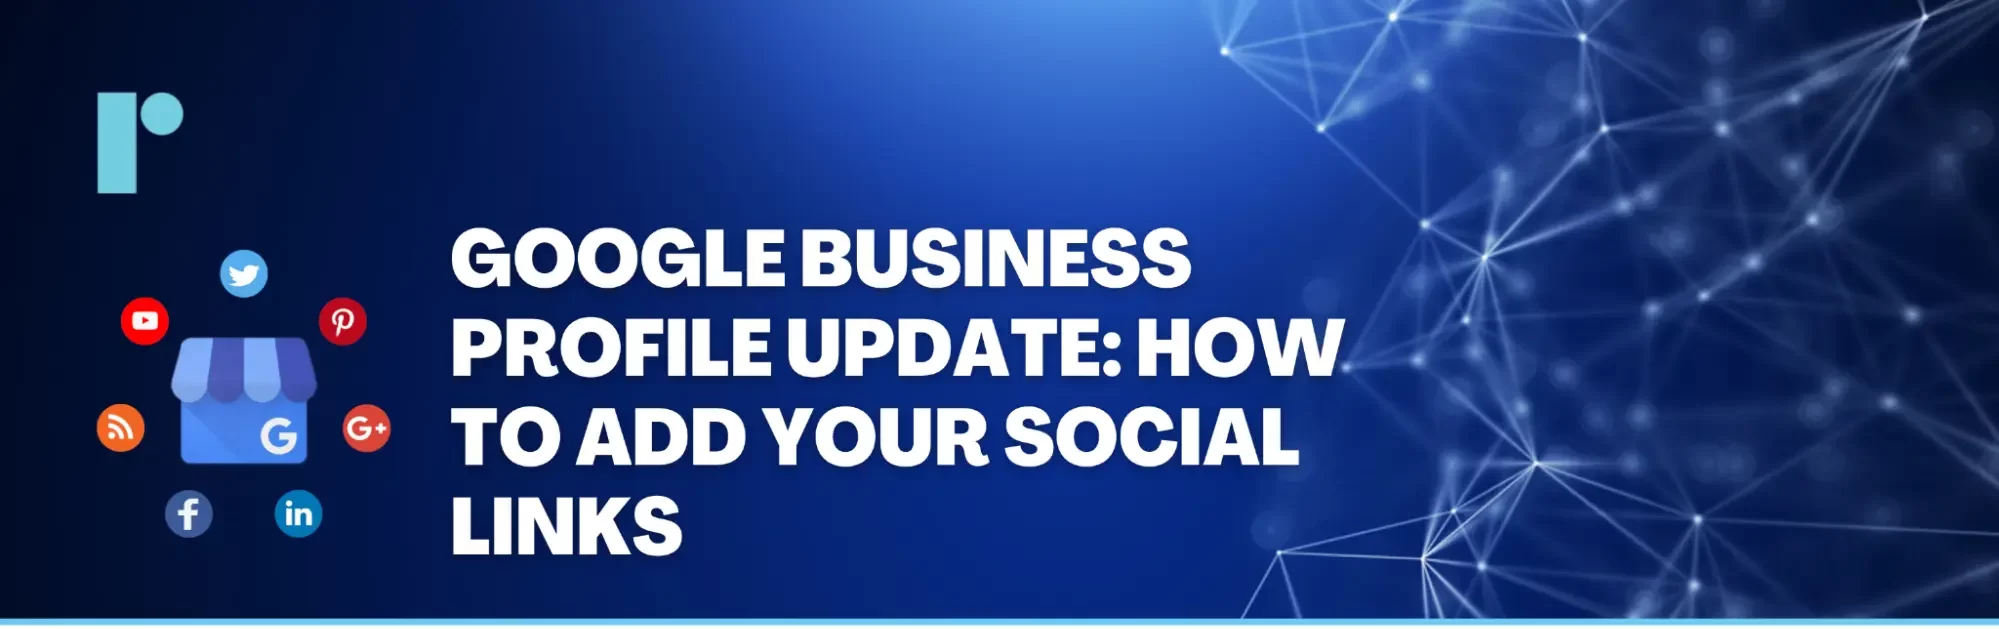 Google Business Profile Update: How to Add Your Social Links